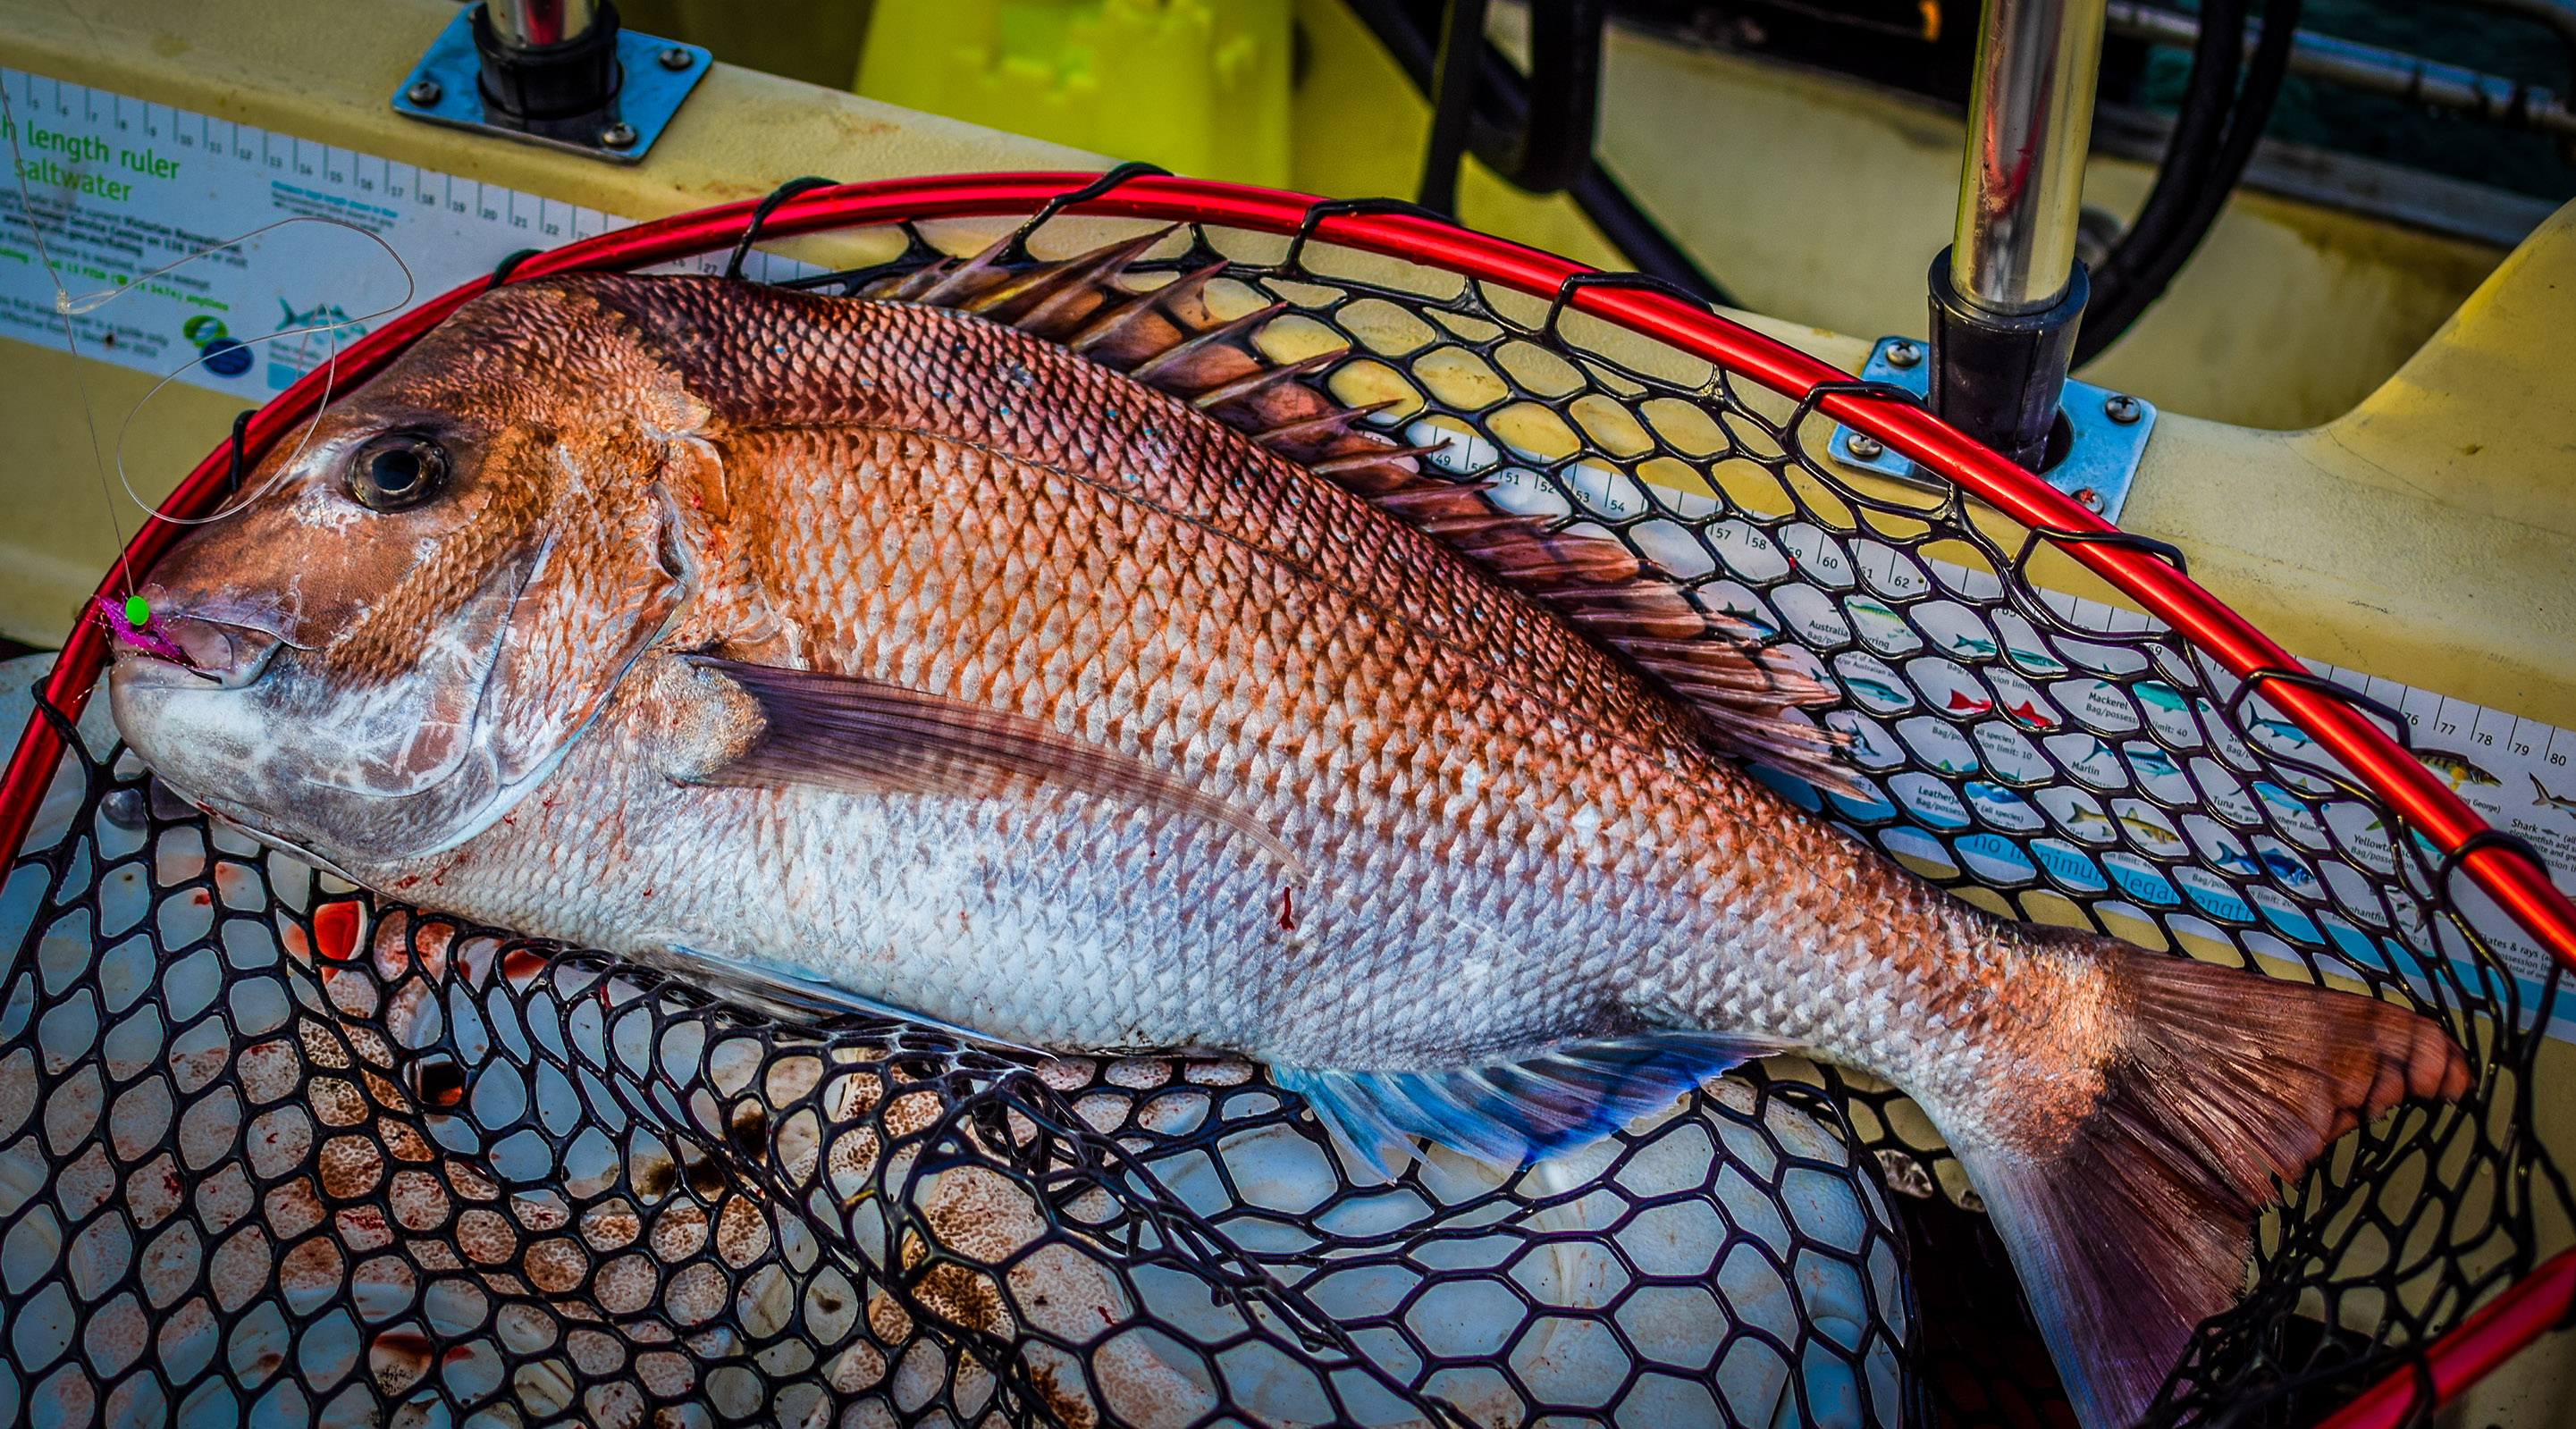 Snapper Snatchers Rig Fishing Rigs Tackle Online Shop Blogs & More  Snapper  snatcher Rig Fishing Rigs Online Shop Buy Now Save Huge Dollars On Black  Label Pre tied Flasher rigs Australian